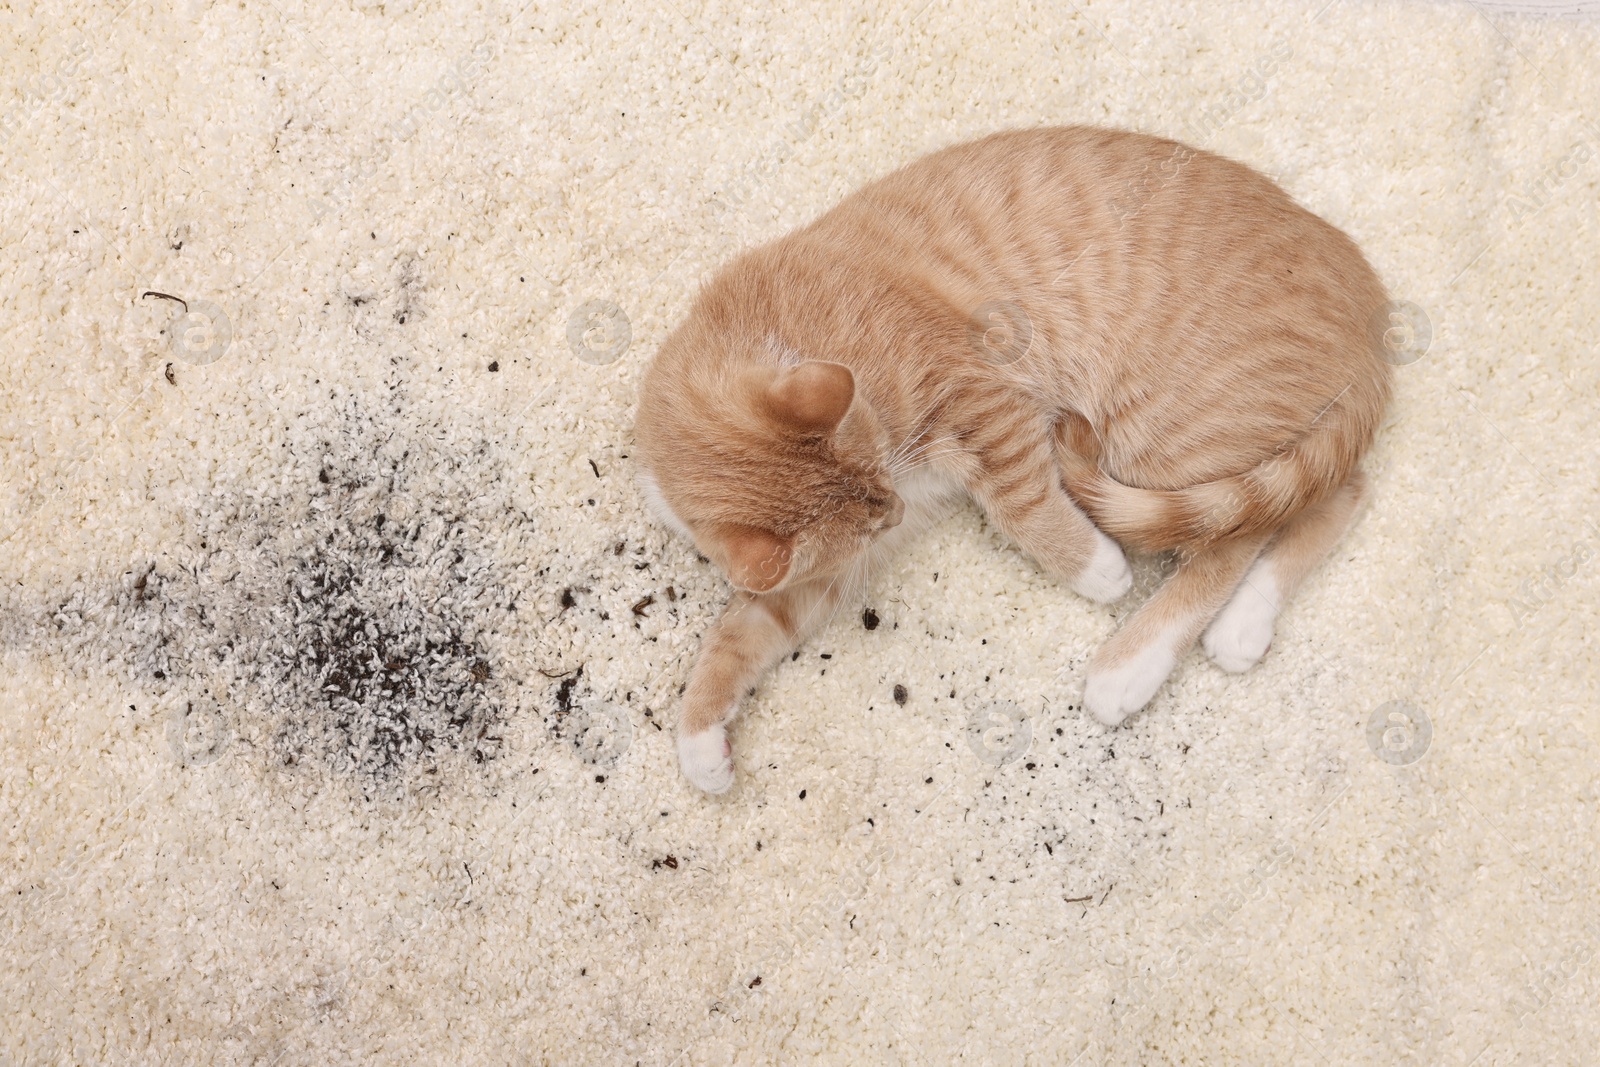 Photo of Cute ginger cat on carpet with scattered soil, top view